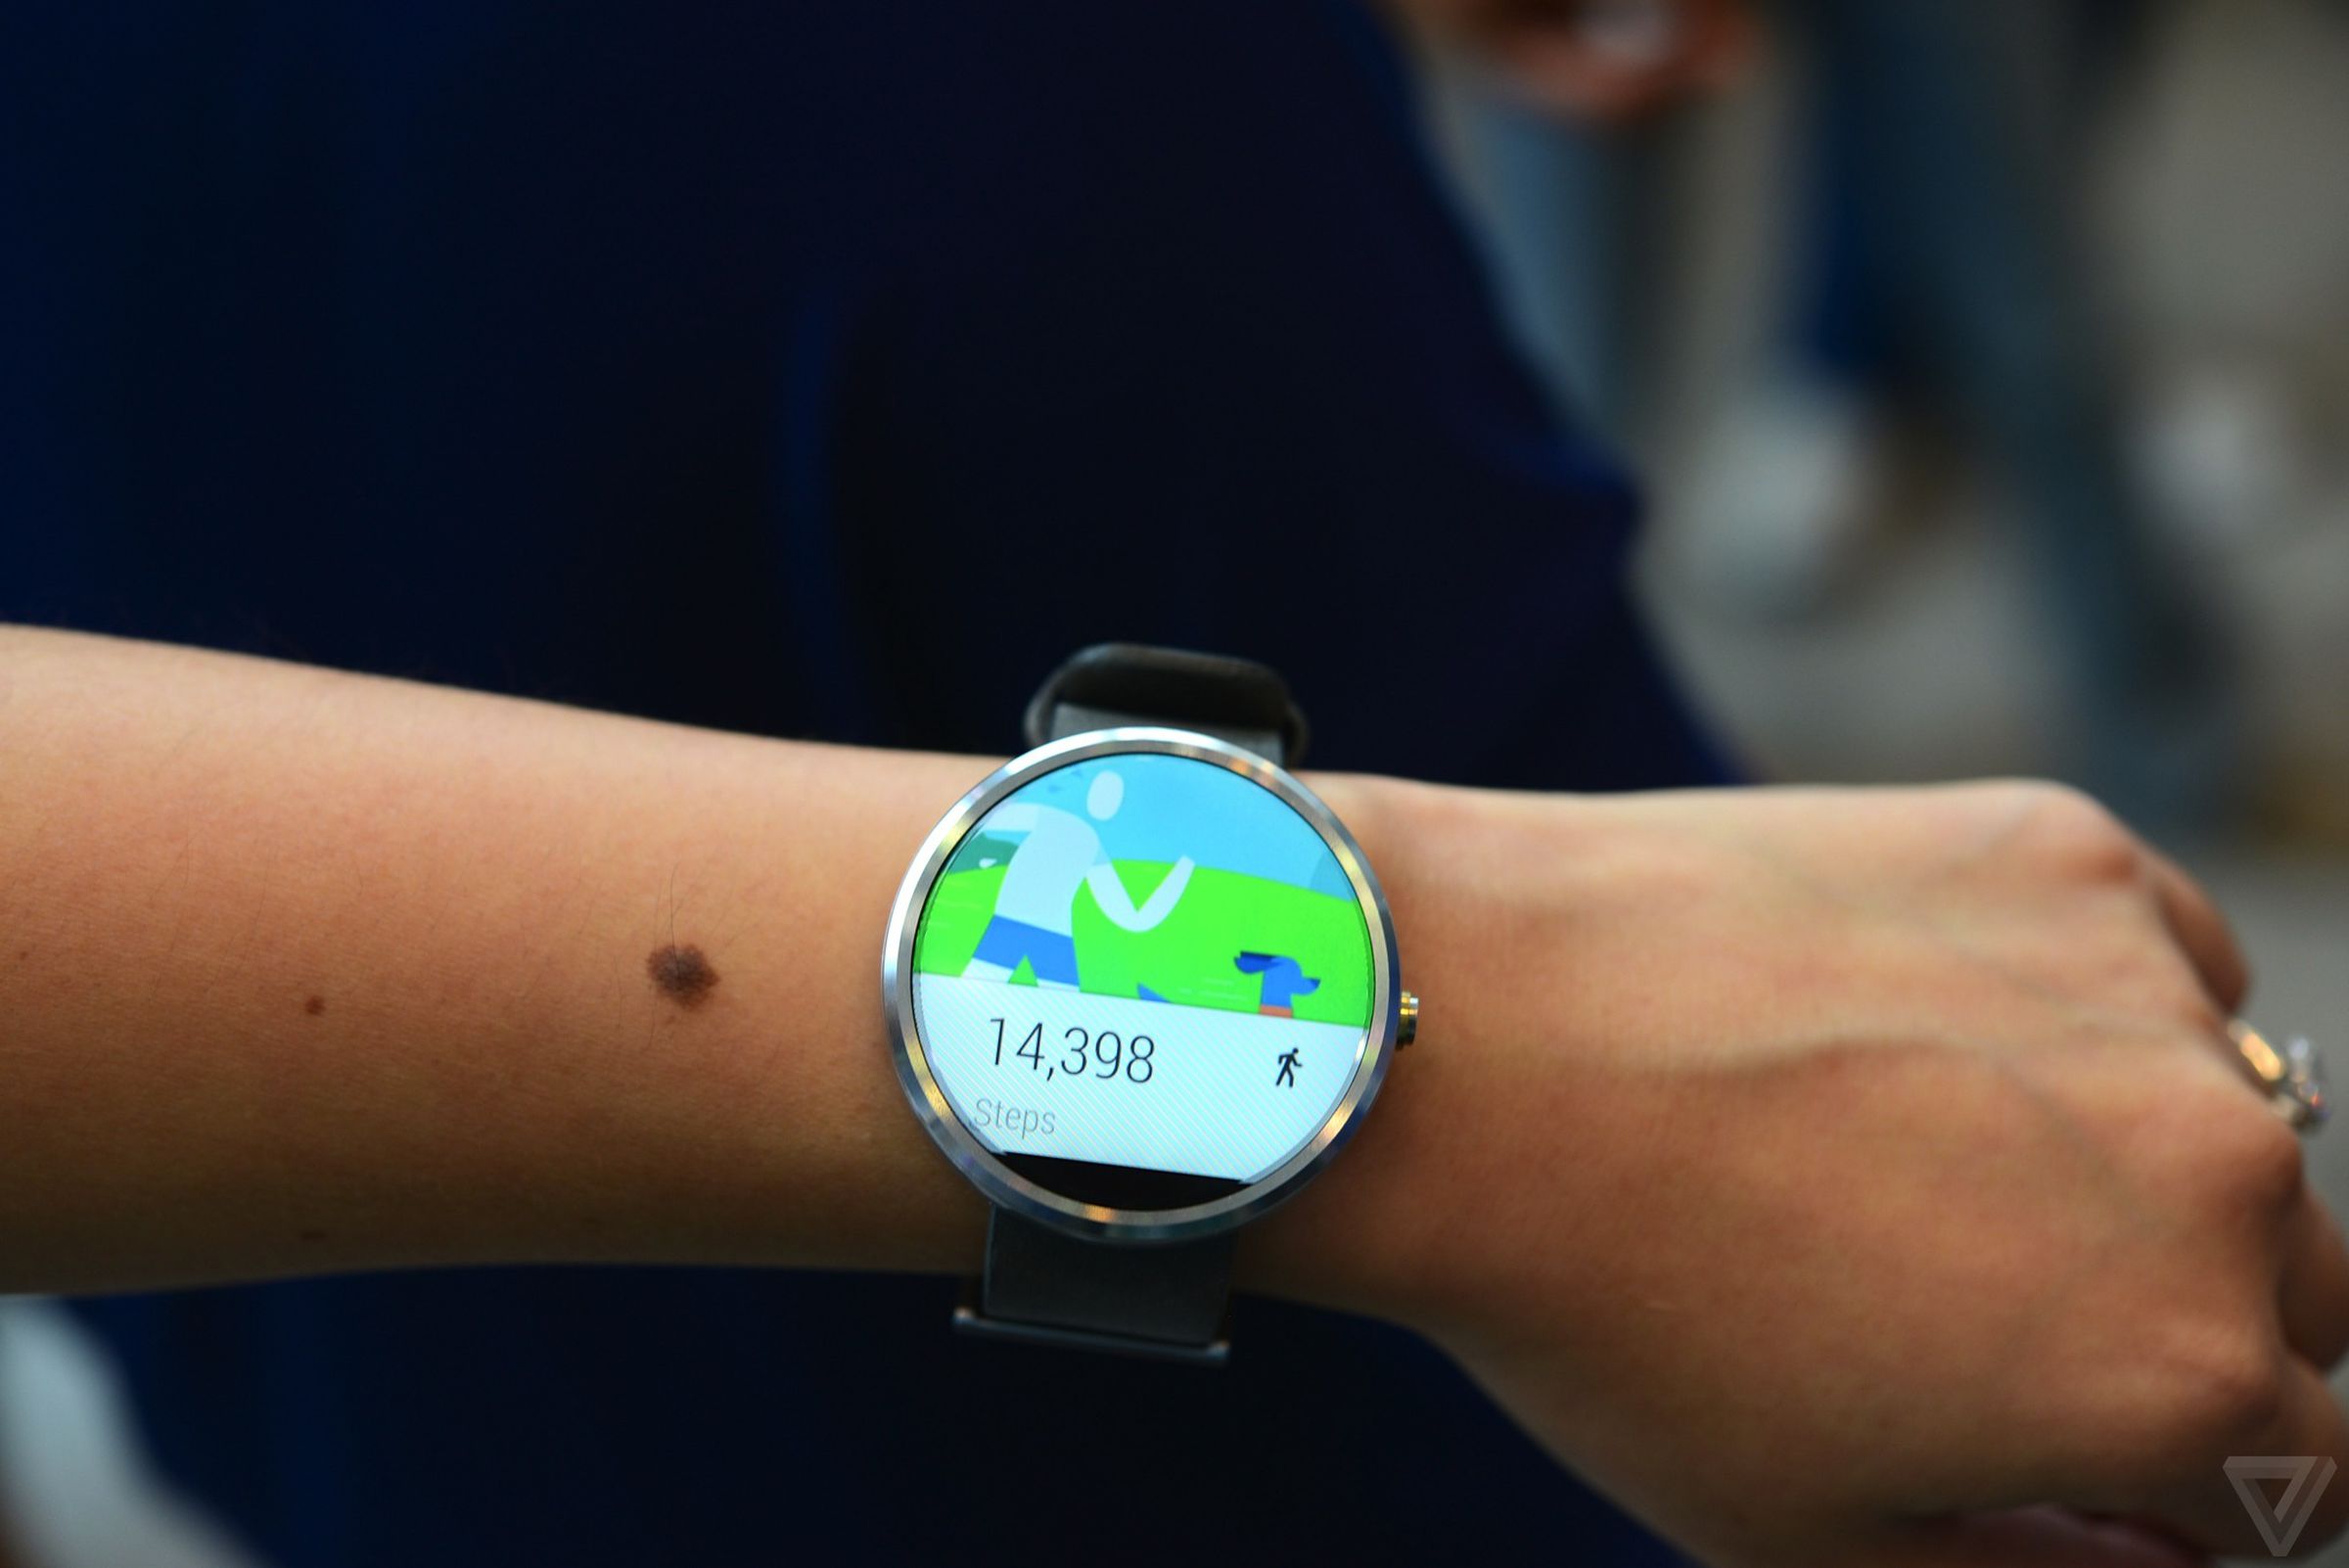 Moto 360 hands-on pictures